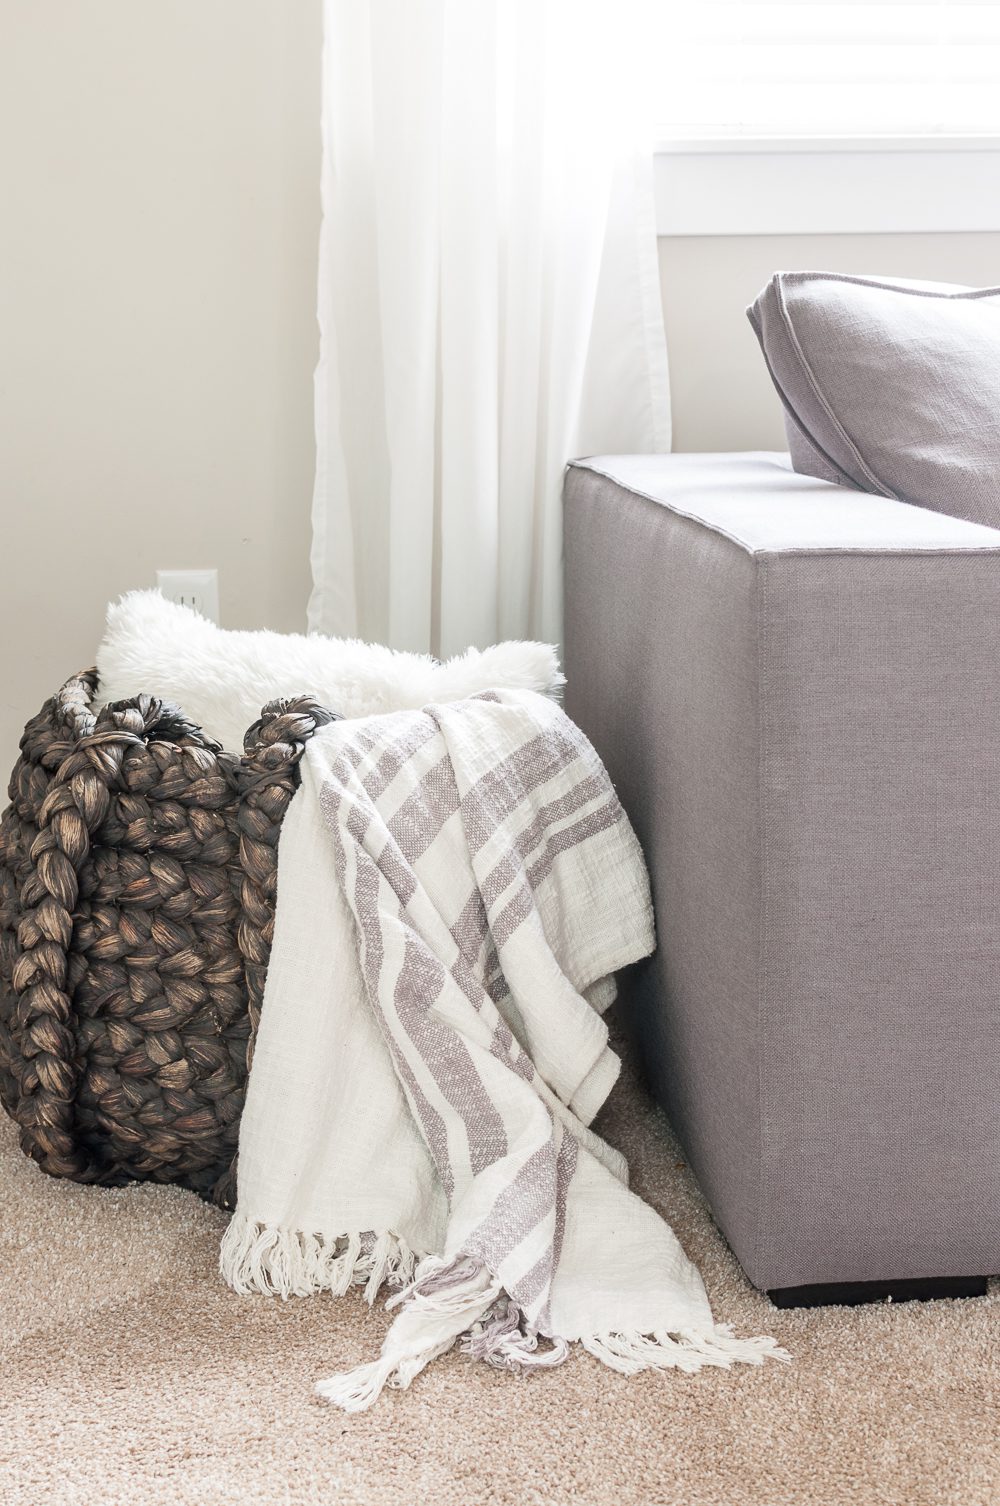 bring in warm textures to a minimalist living room to provide a cozy element that feels like home.